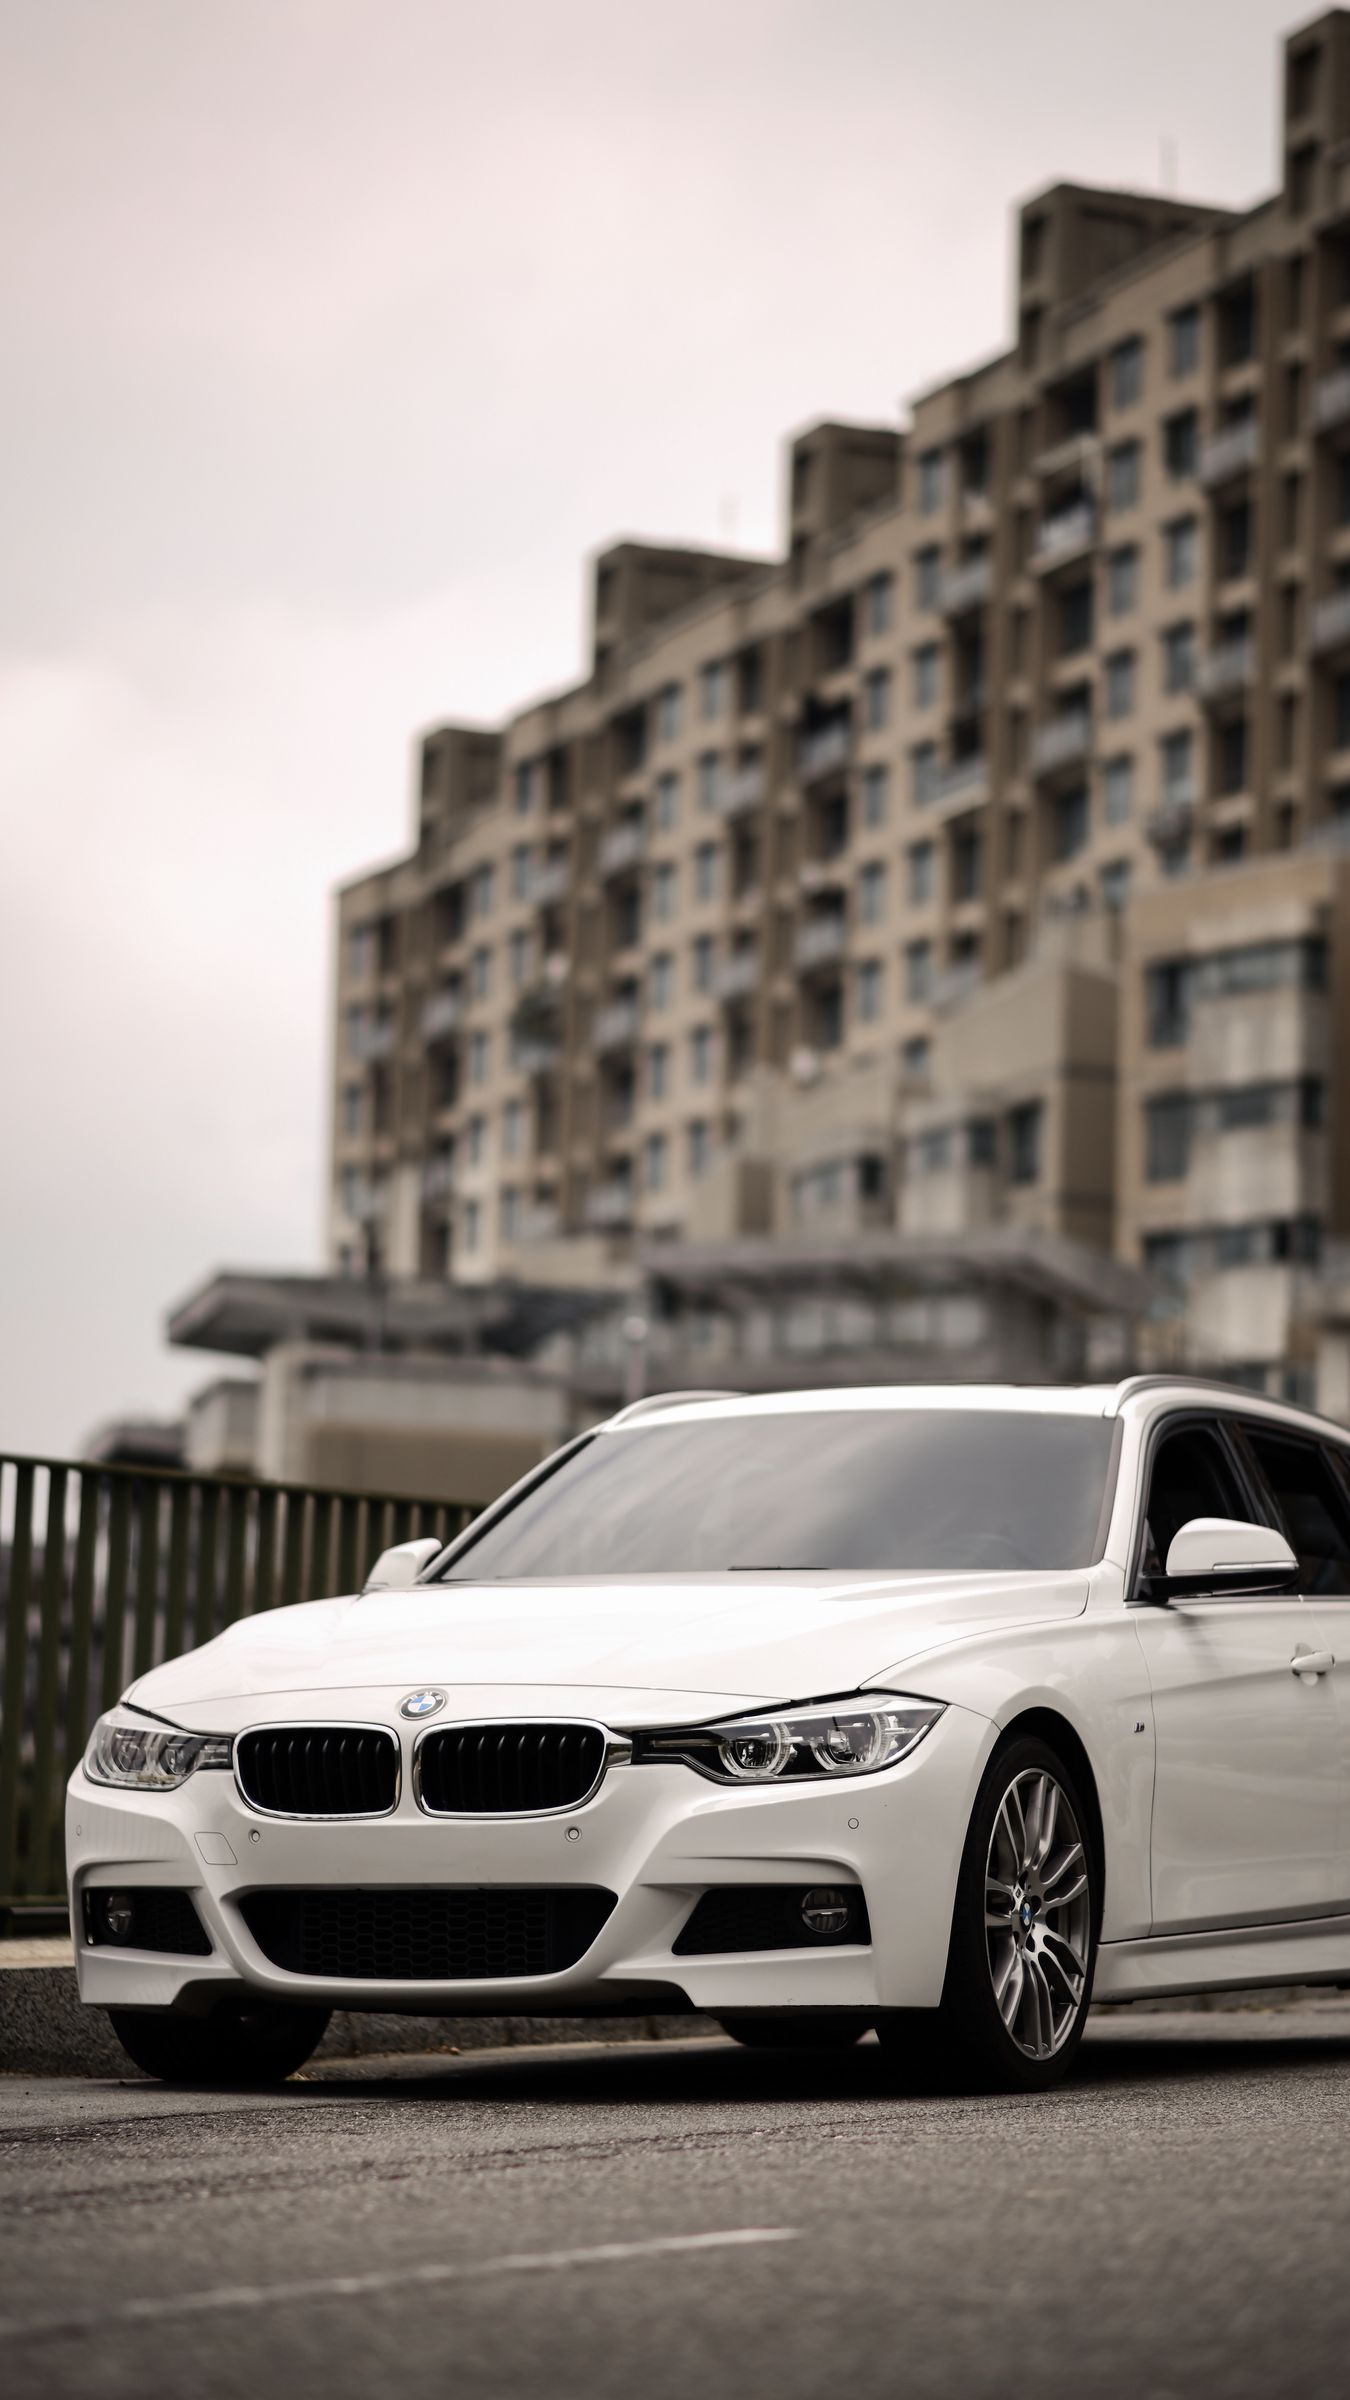 Download wallpaper 1350x2400 bmw 320i, bmw, car, white, city iphone 8+/7+/6s+/for parallax HD background